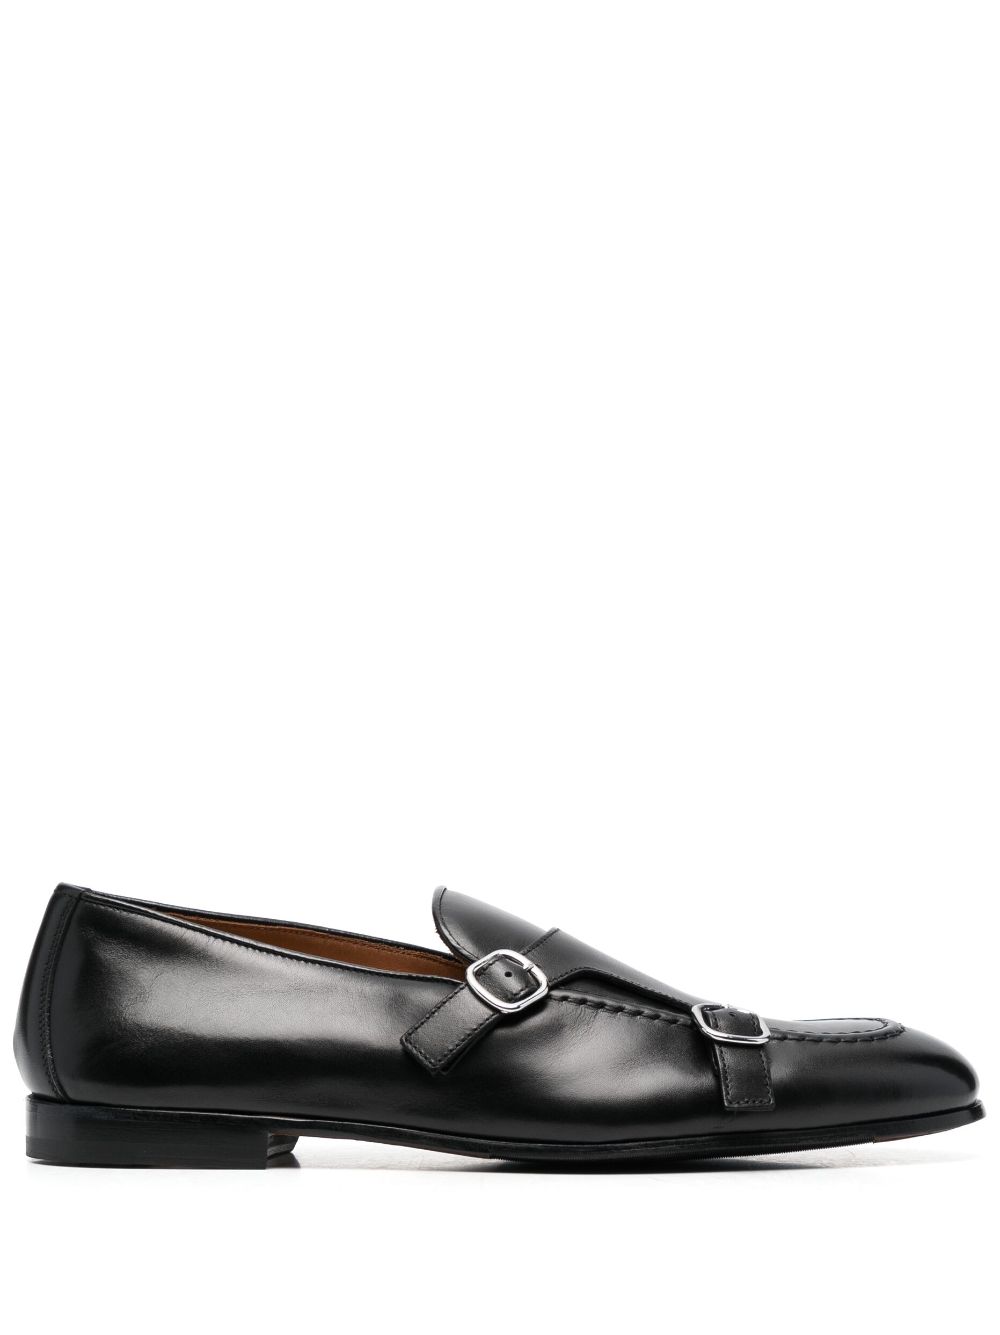 Doucal's double-strap smooth-leather monk shoes - Black von Doucal's